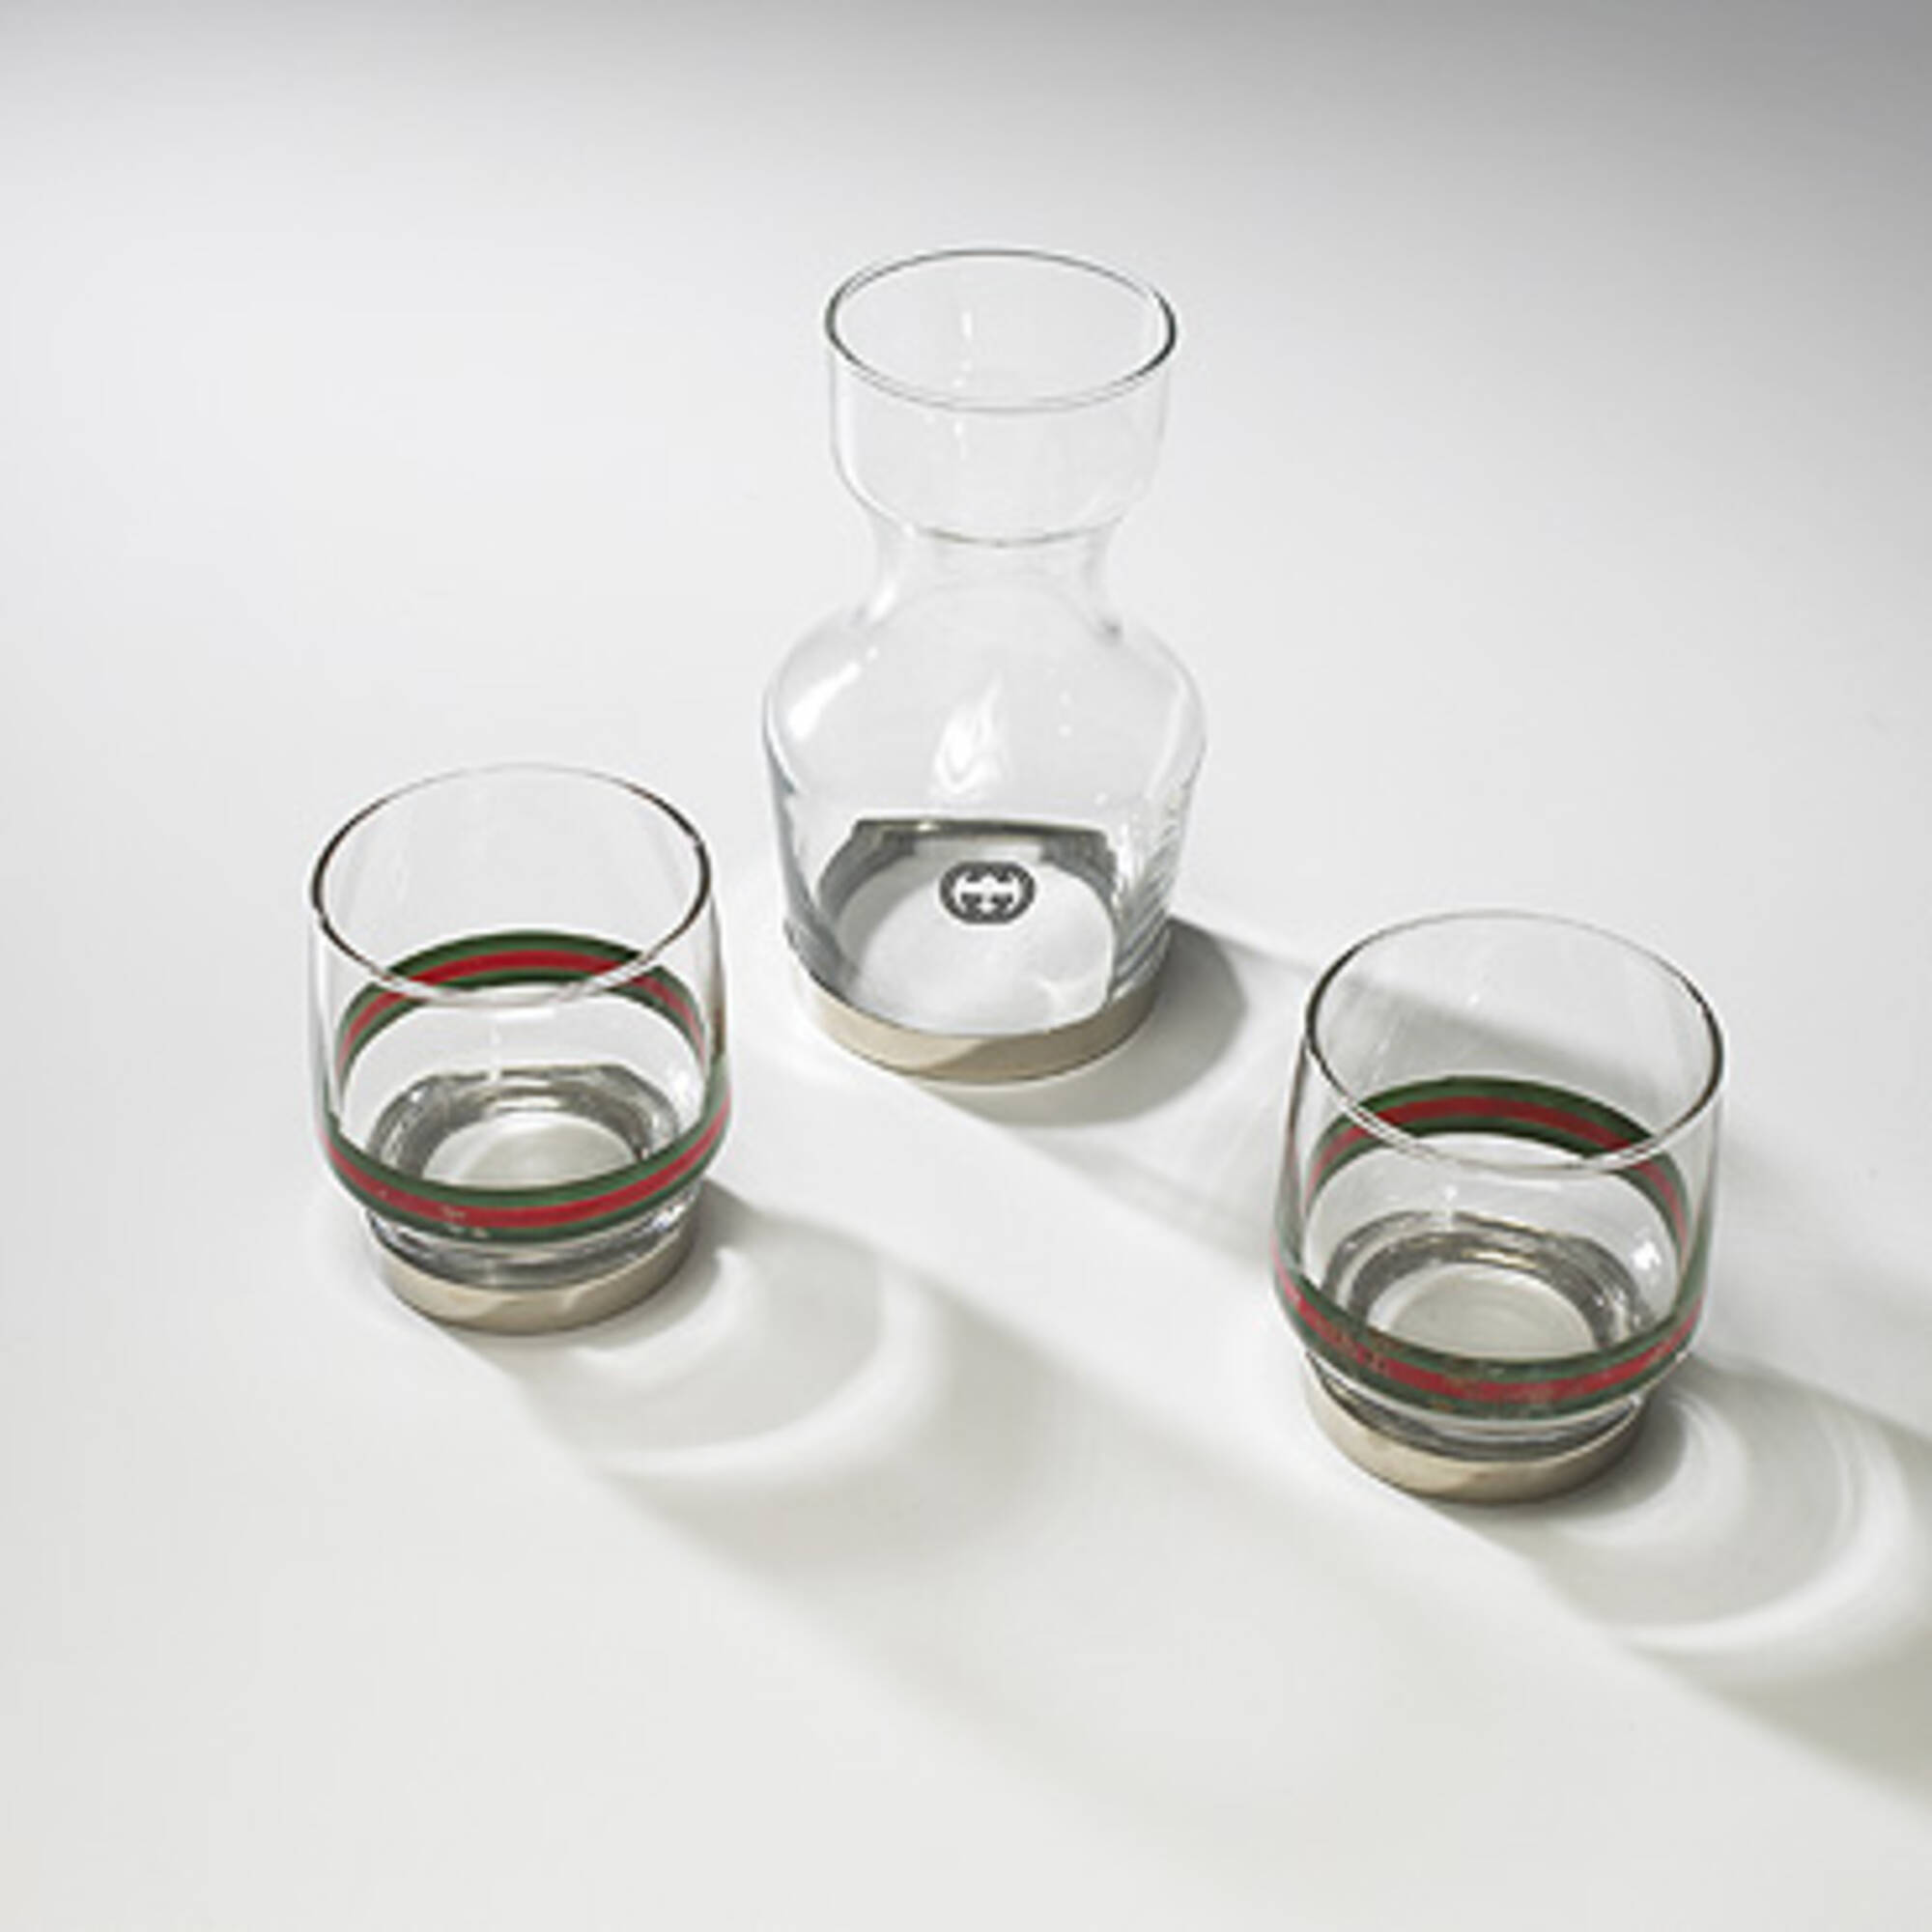 539: GUCCI, water pitcher and pair of glasses < Mass Modern, 23 June 2007 <  Auctions | Wright: Auctions of Art and Design